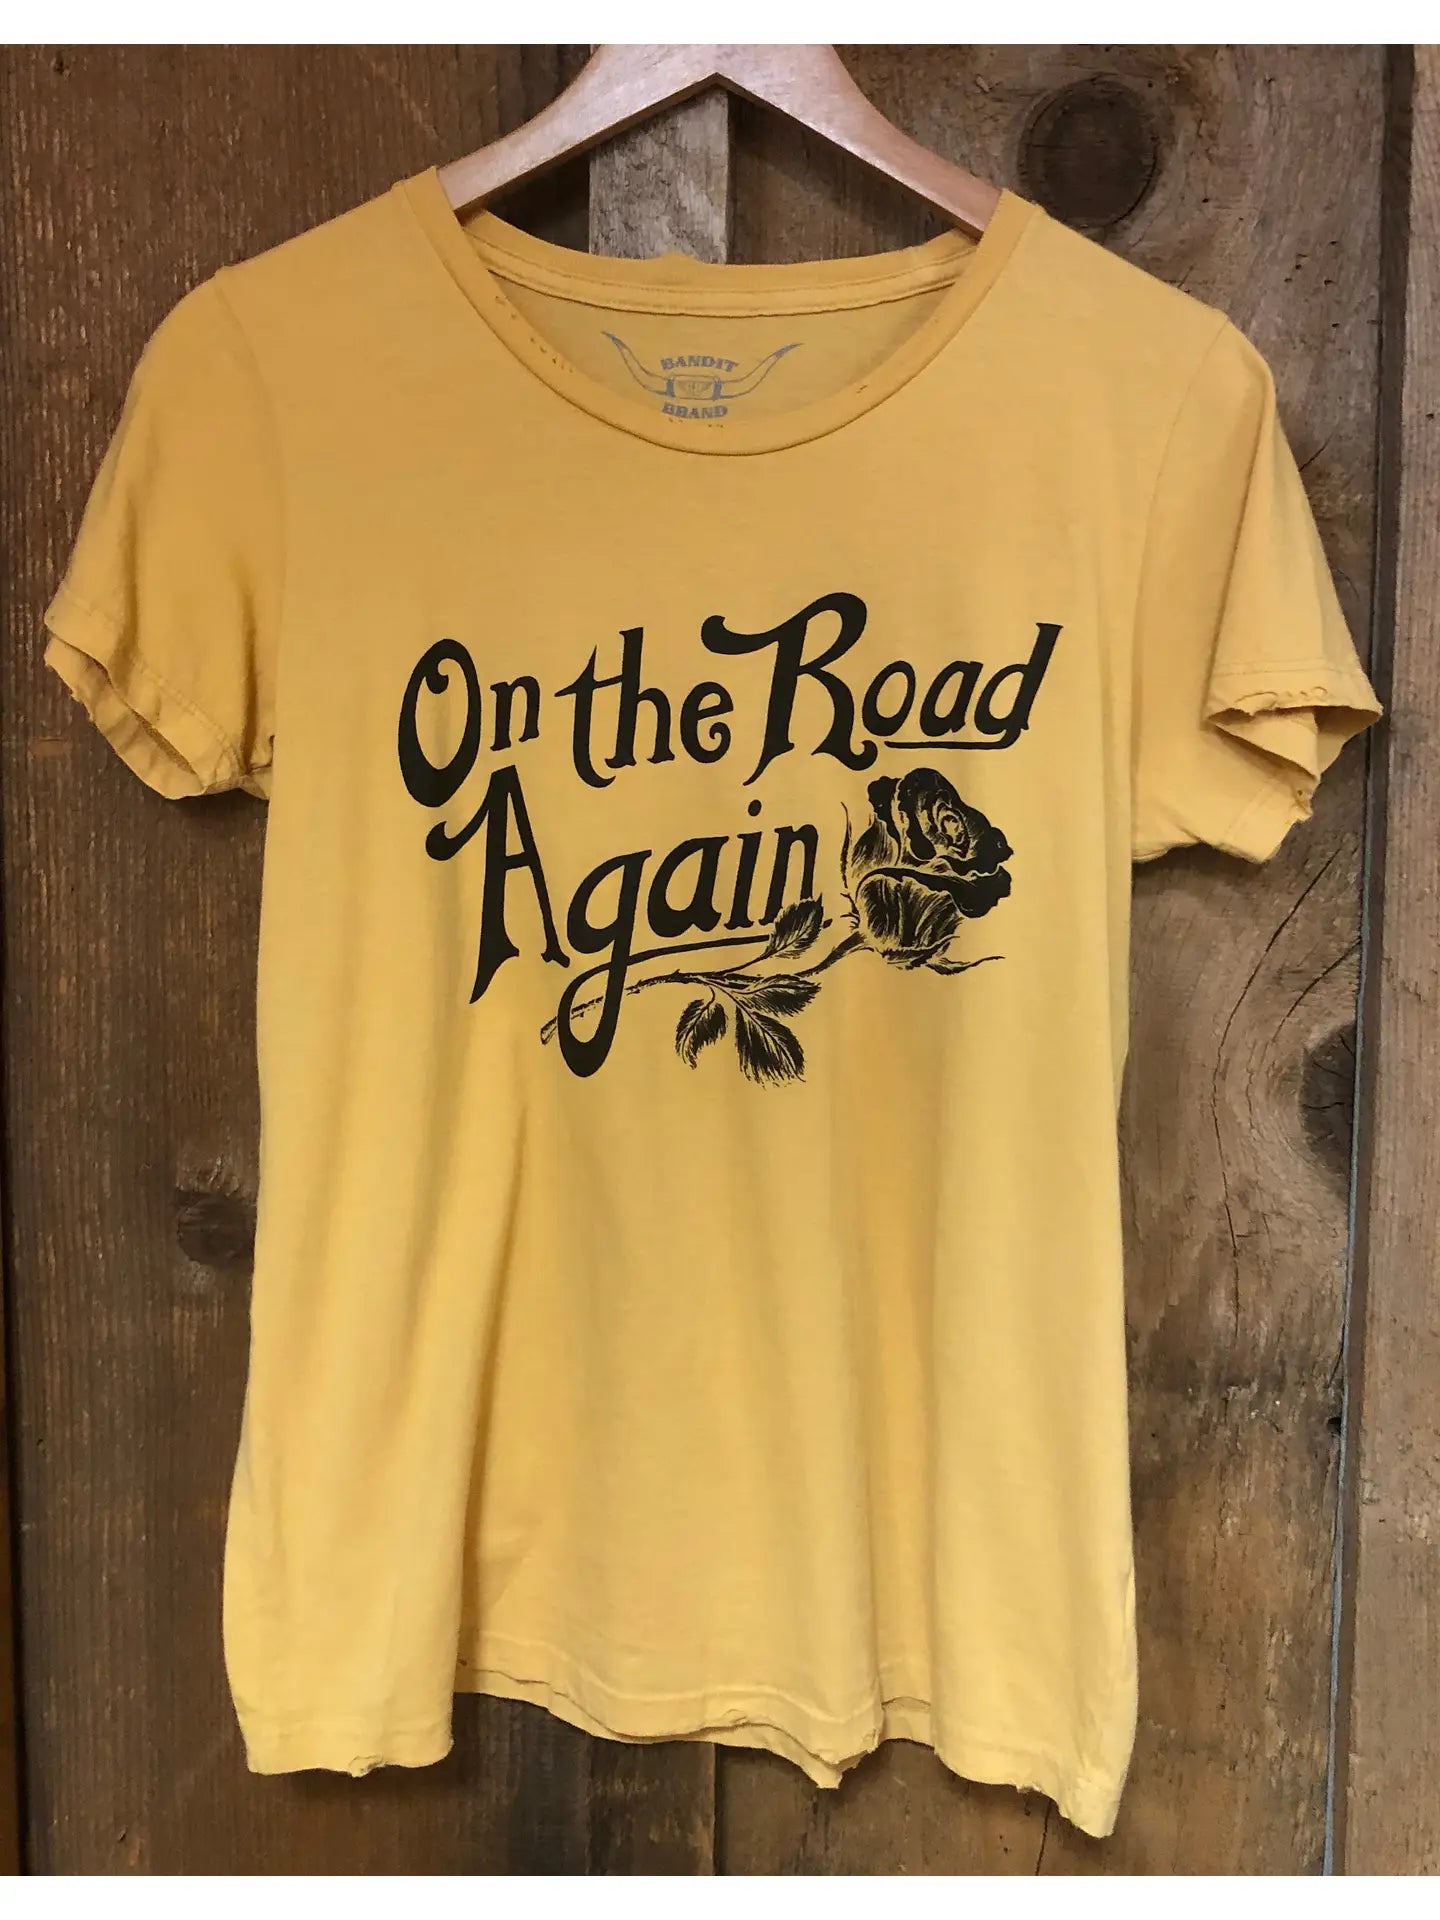 On the Road Tee